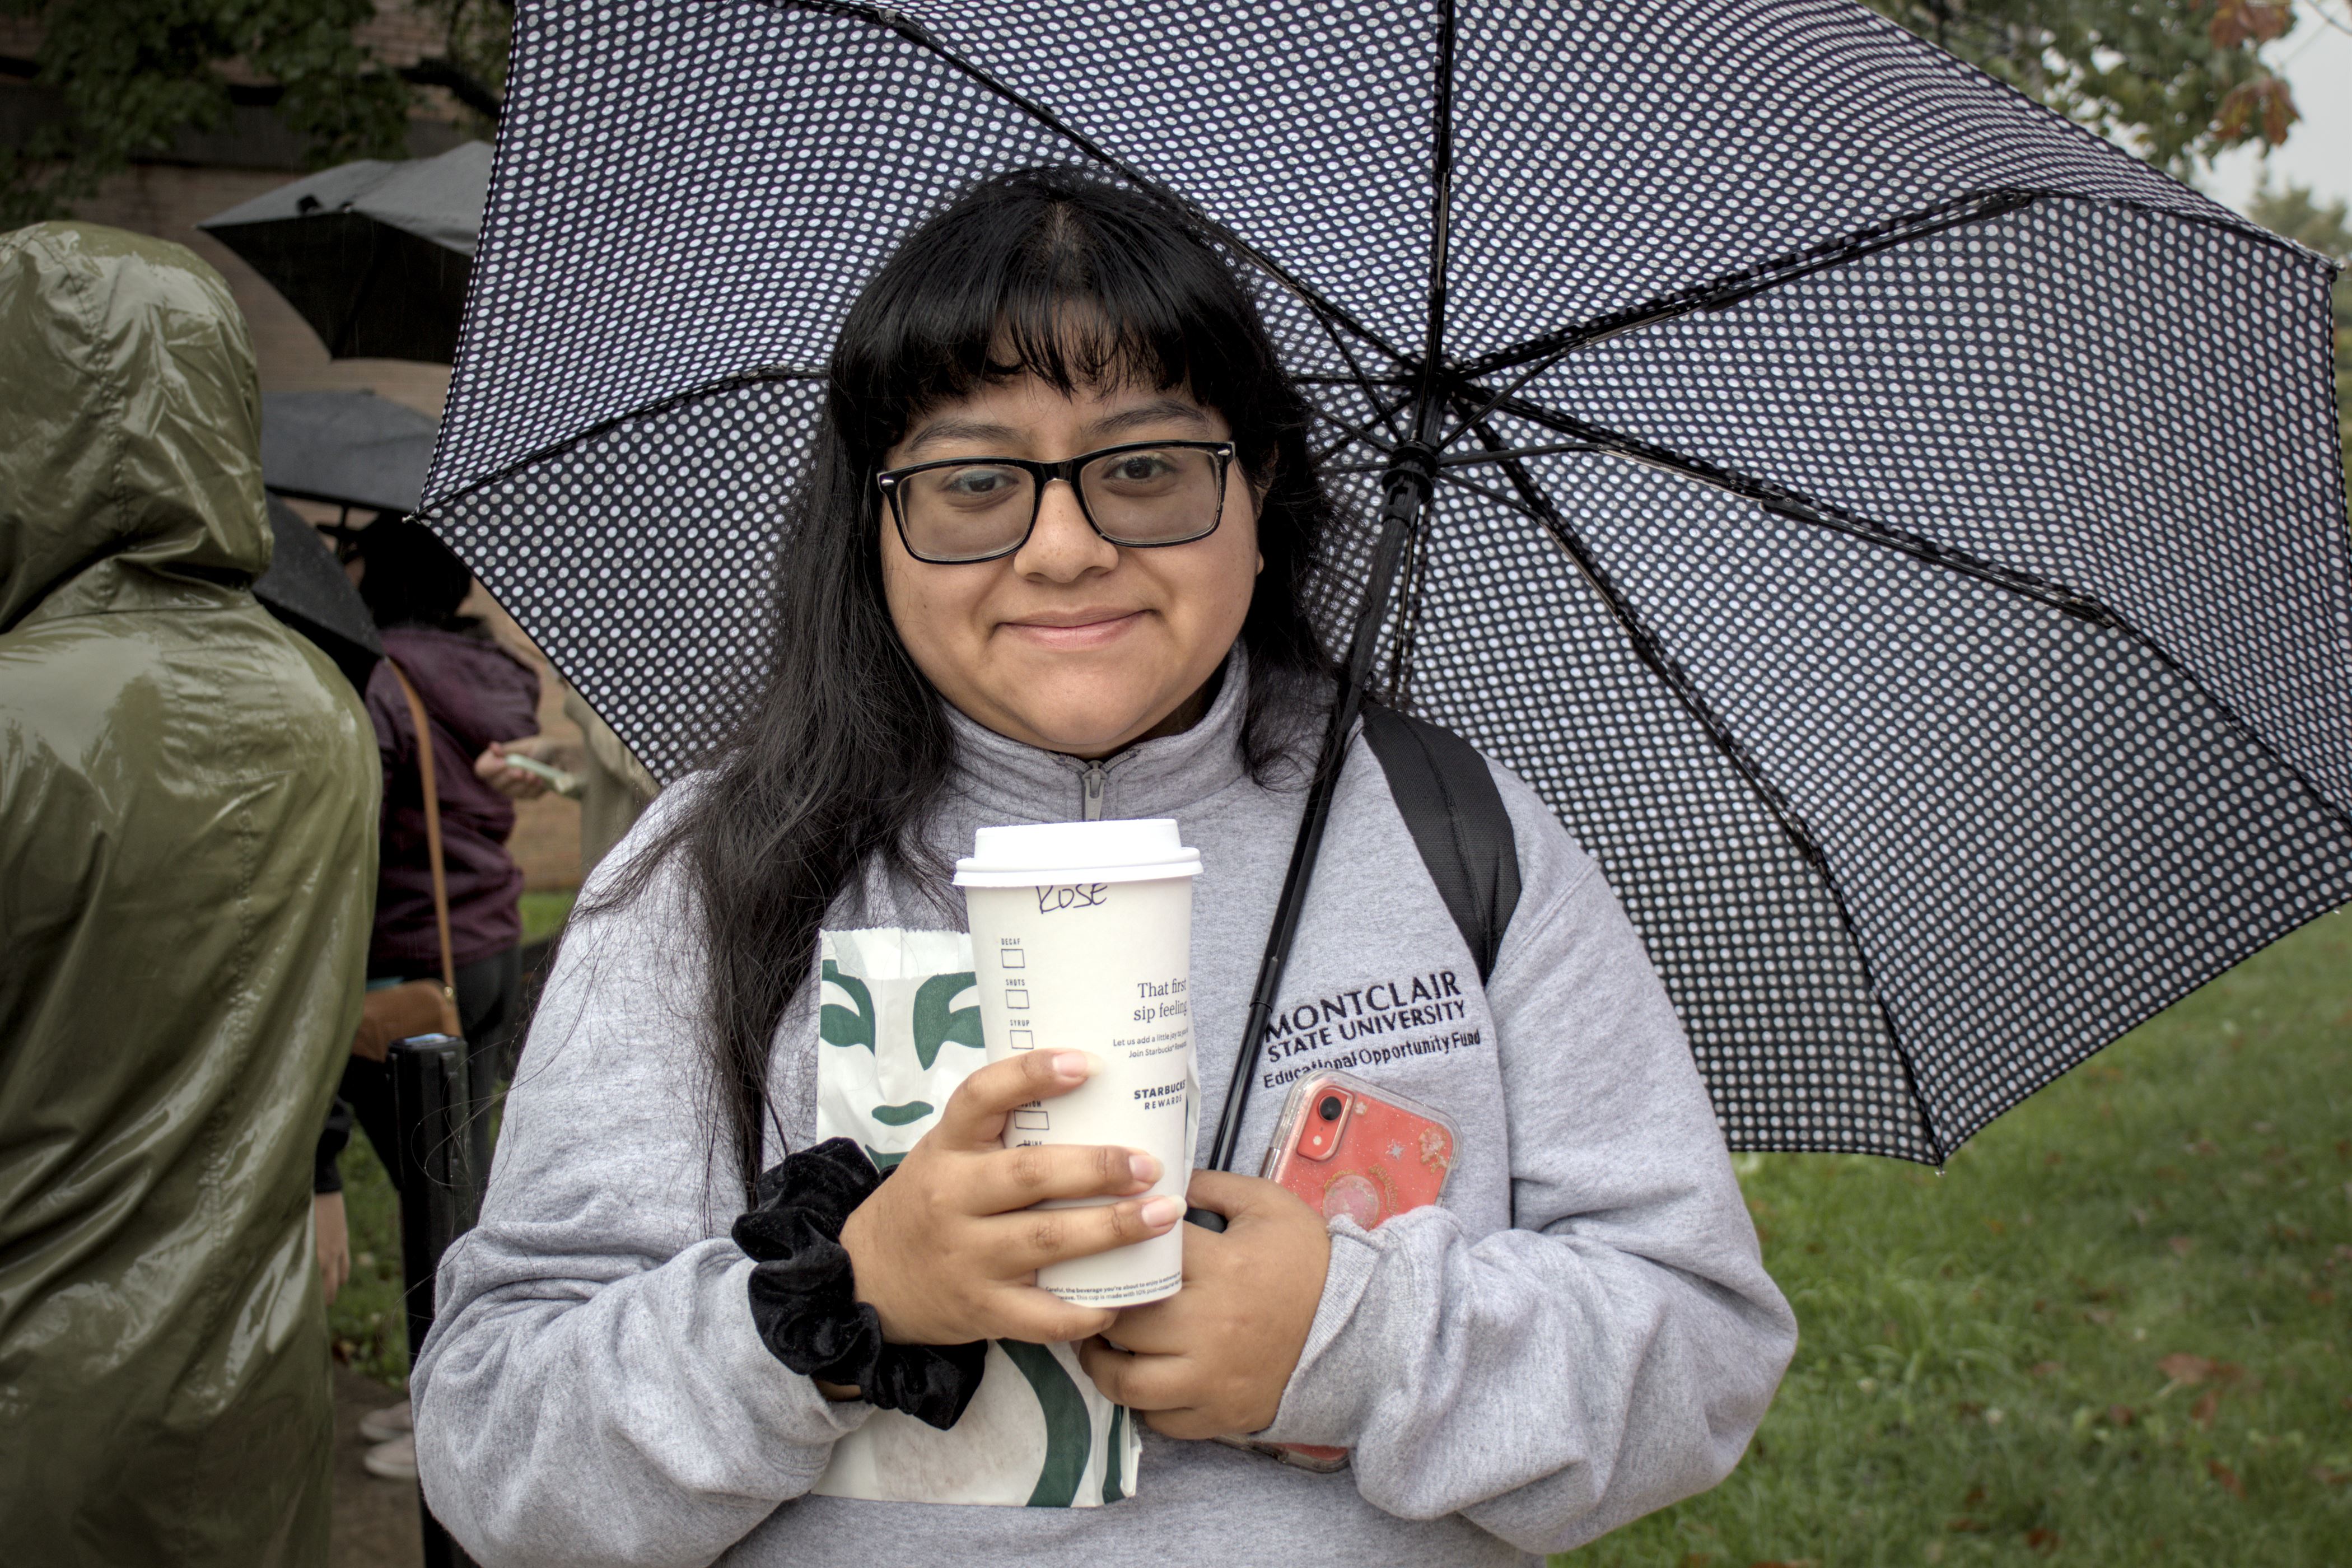 Rosario Ascencio, senior psychology major with a minor in child advocacy and policy, has been waiting for Starbucks to arrive onto the Montclair State campus.